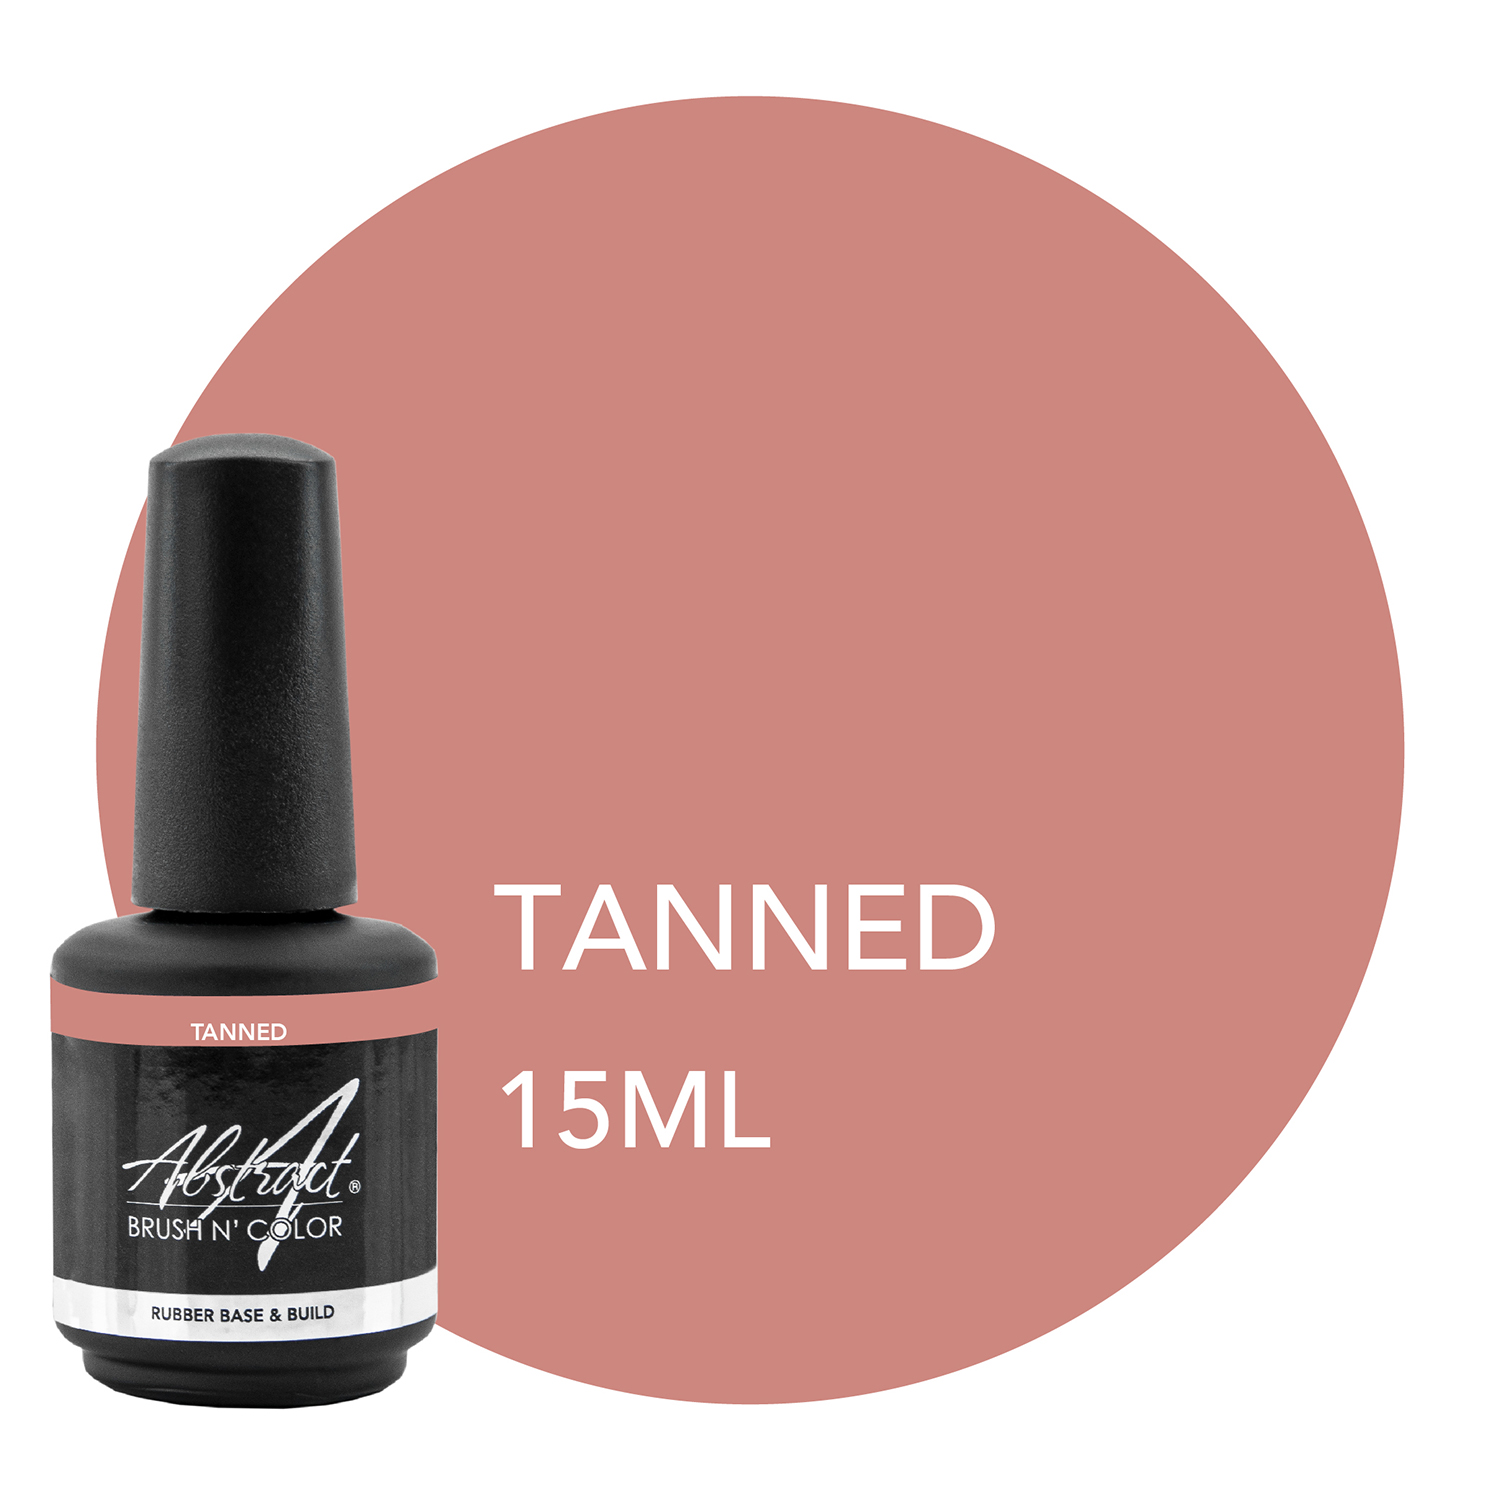 Rubber Base & Build Tanned 15ml, Abstract | 066302